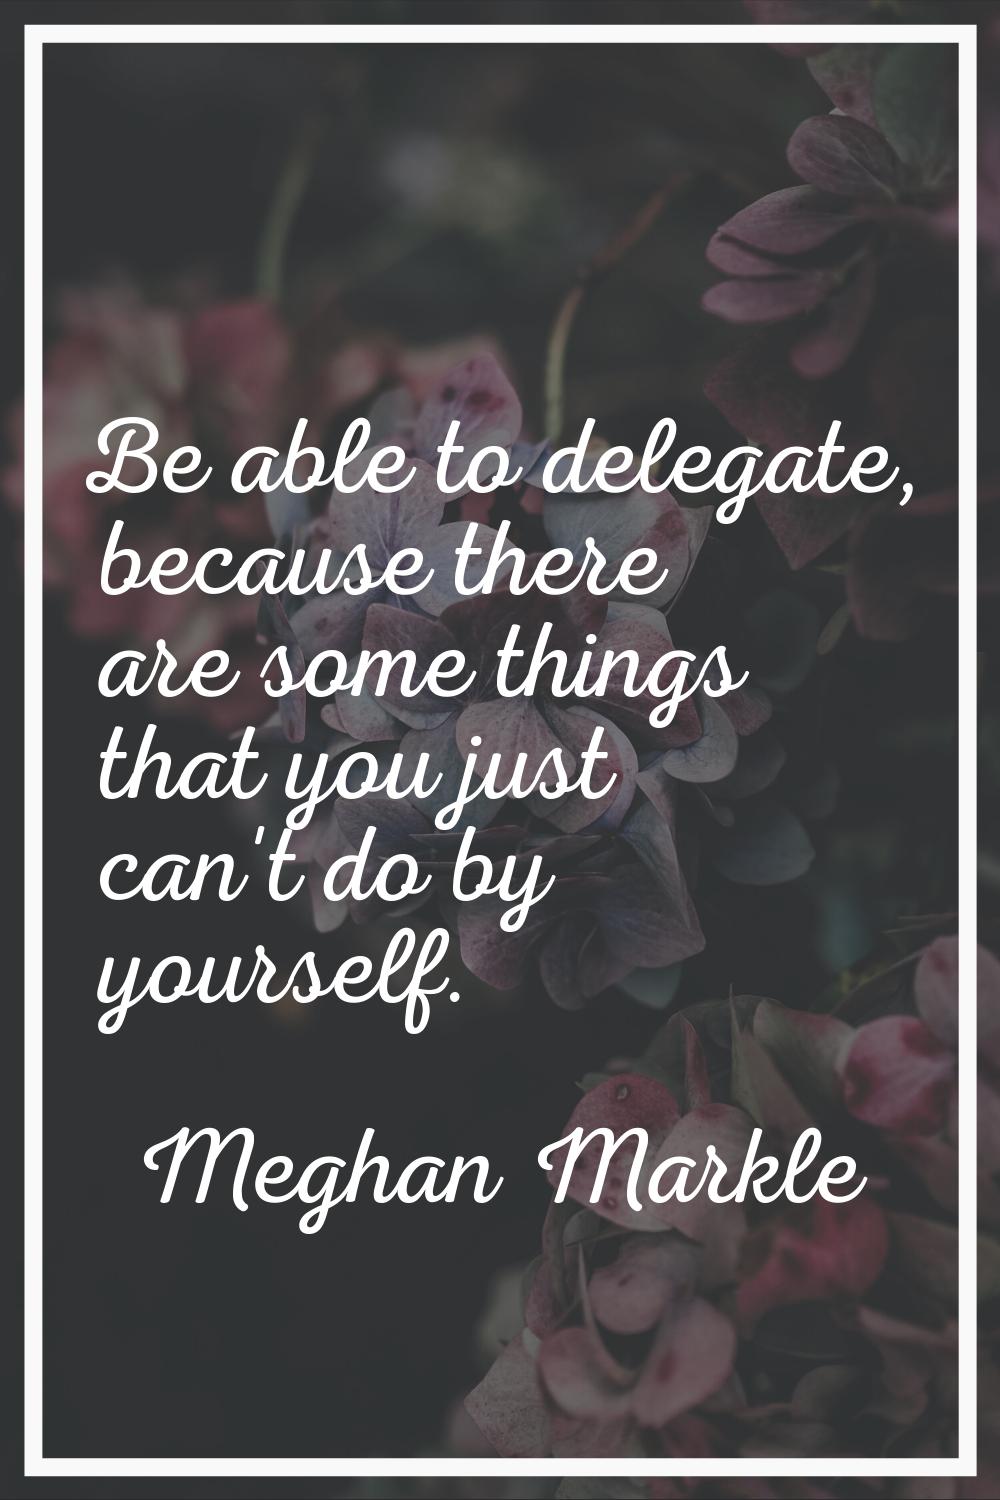 Be able to delegate, because there are some things that you just can't do by yourself.